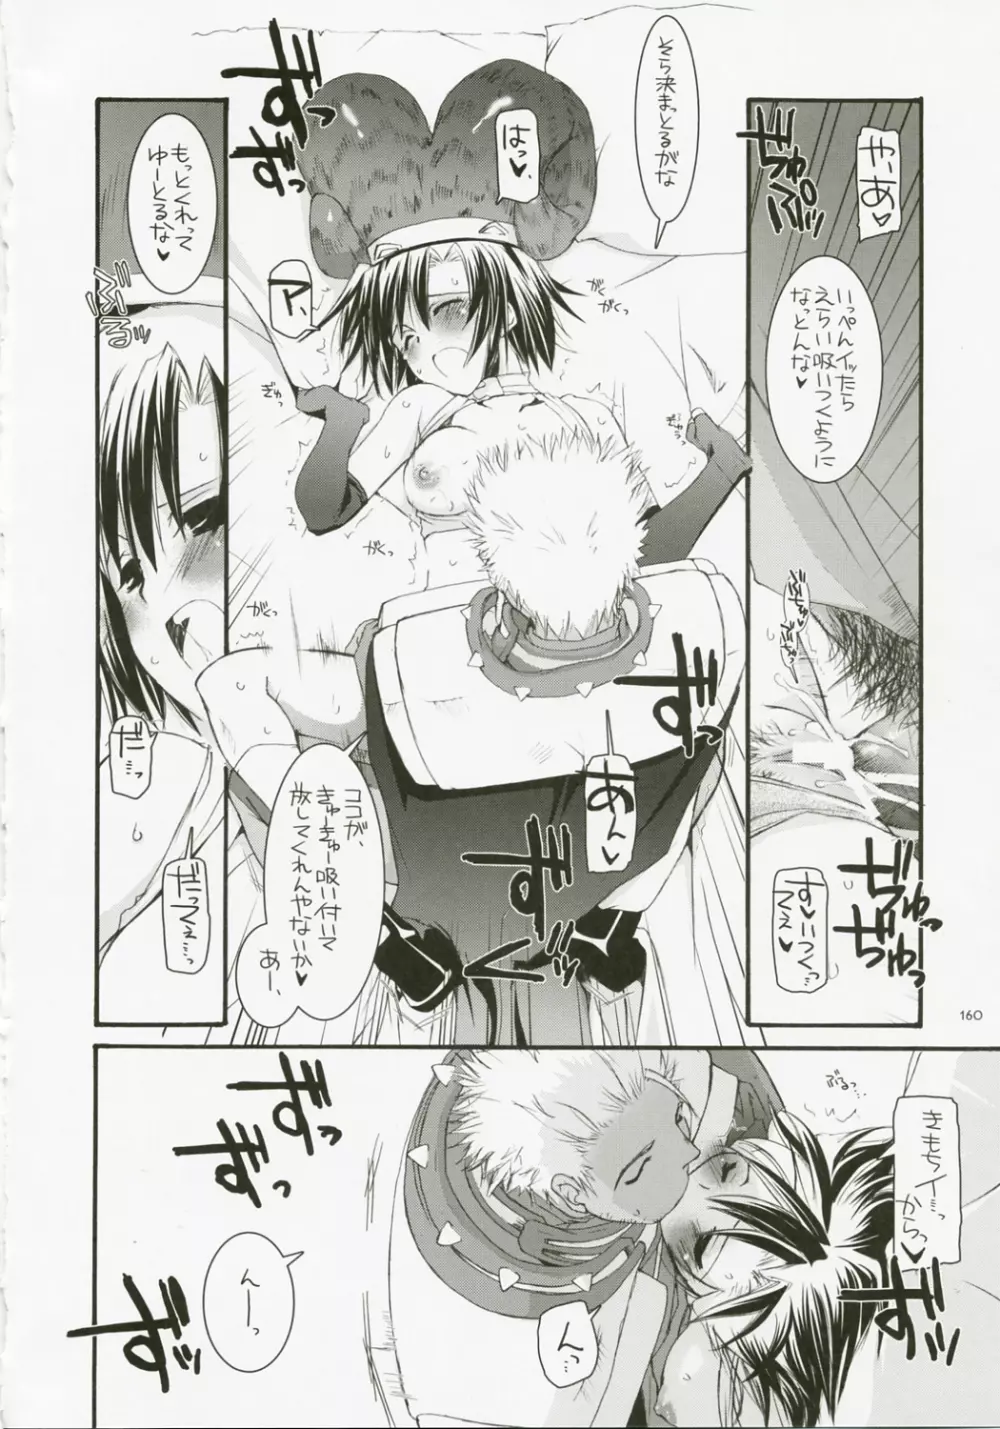 DL-RO総集編04 - page159